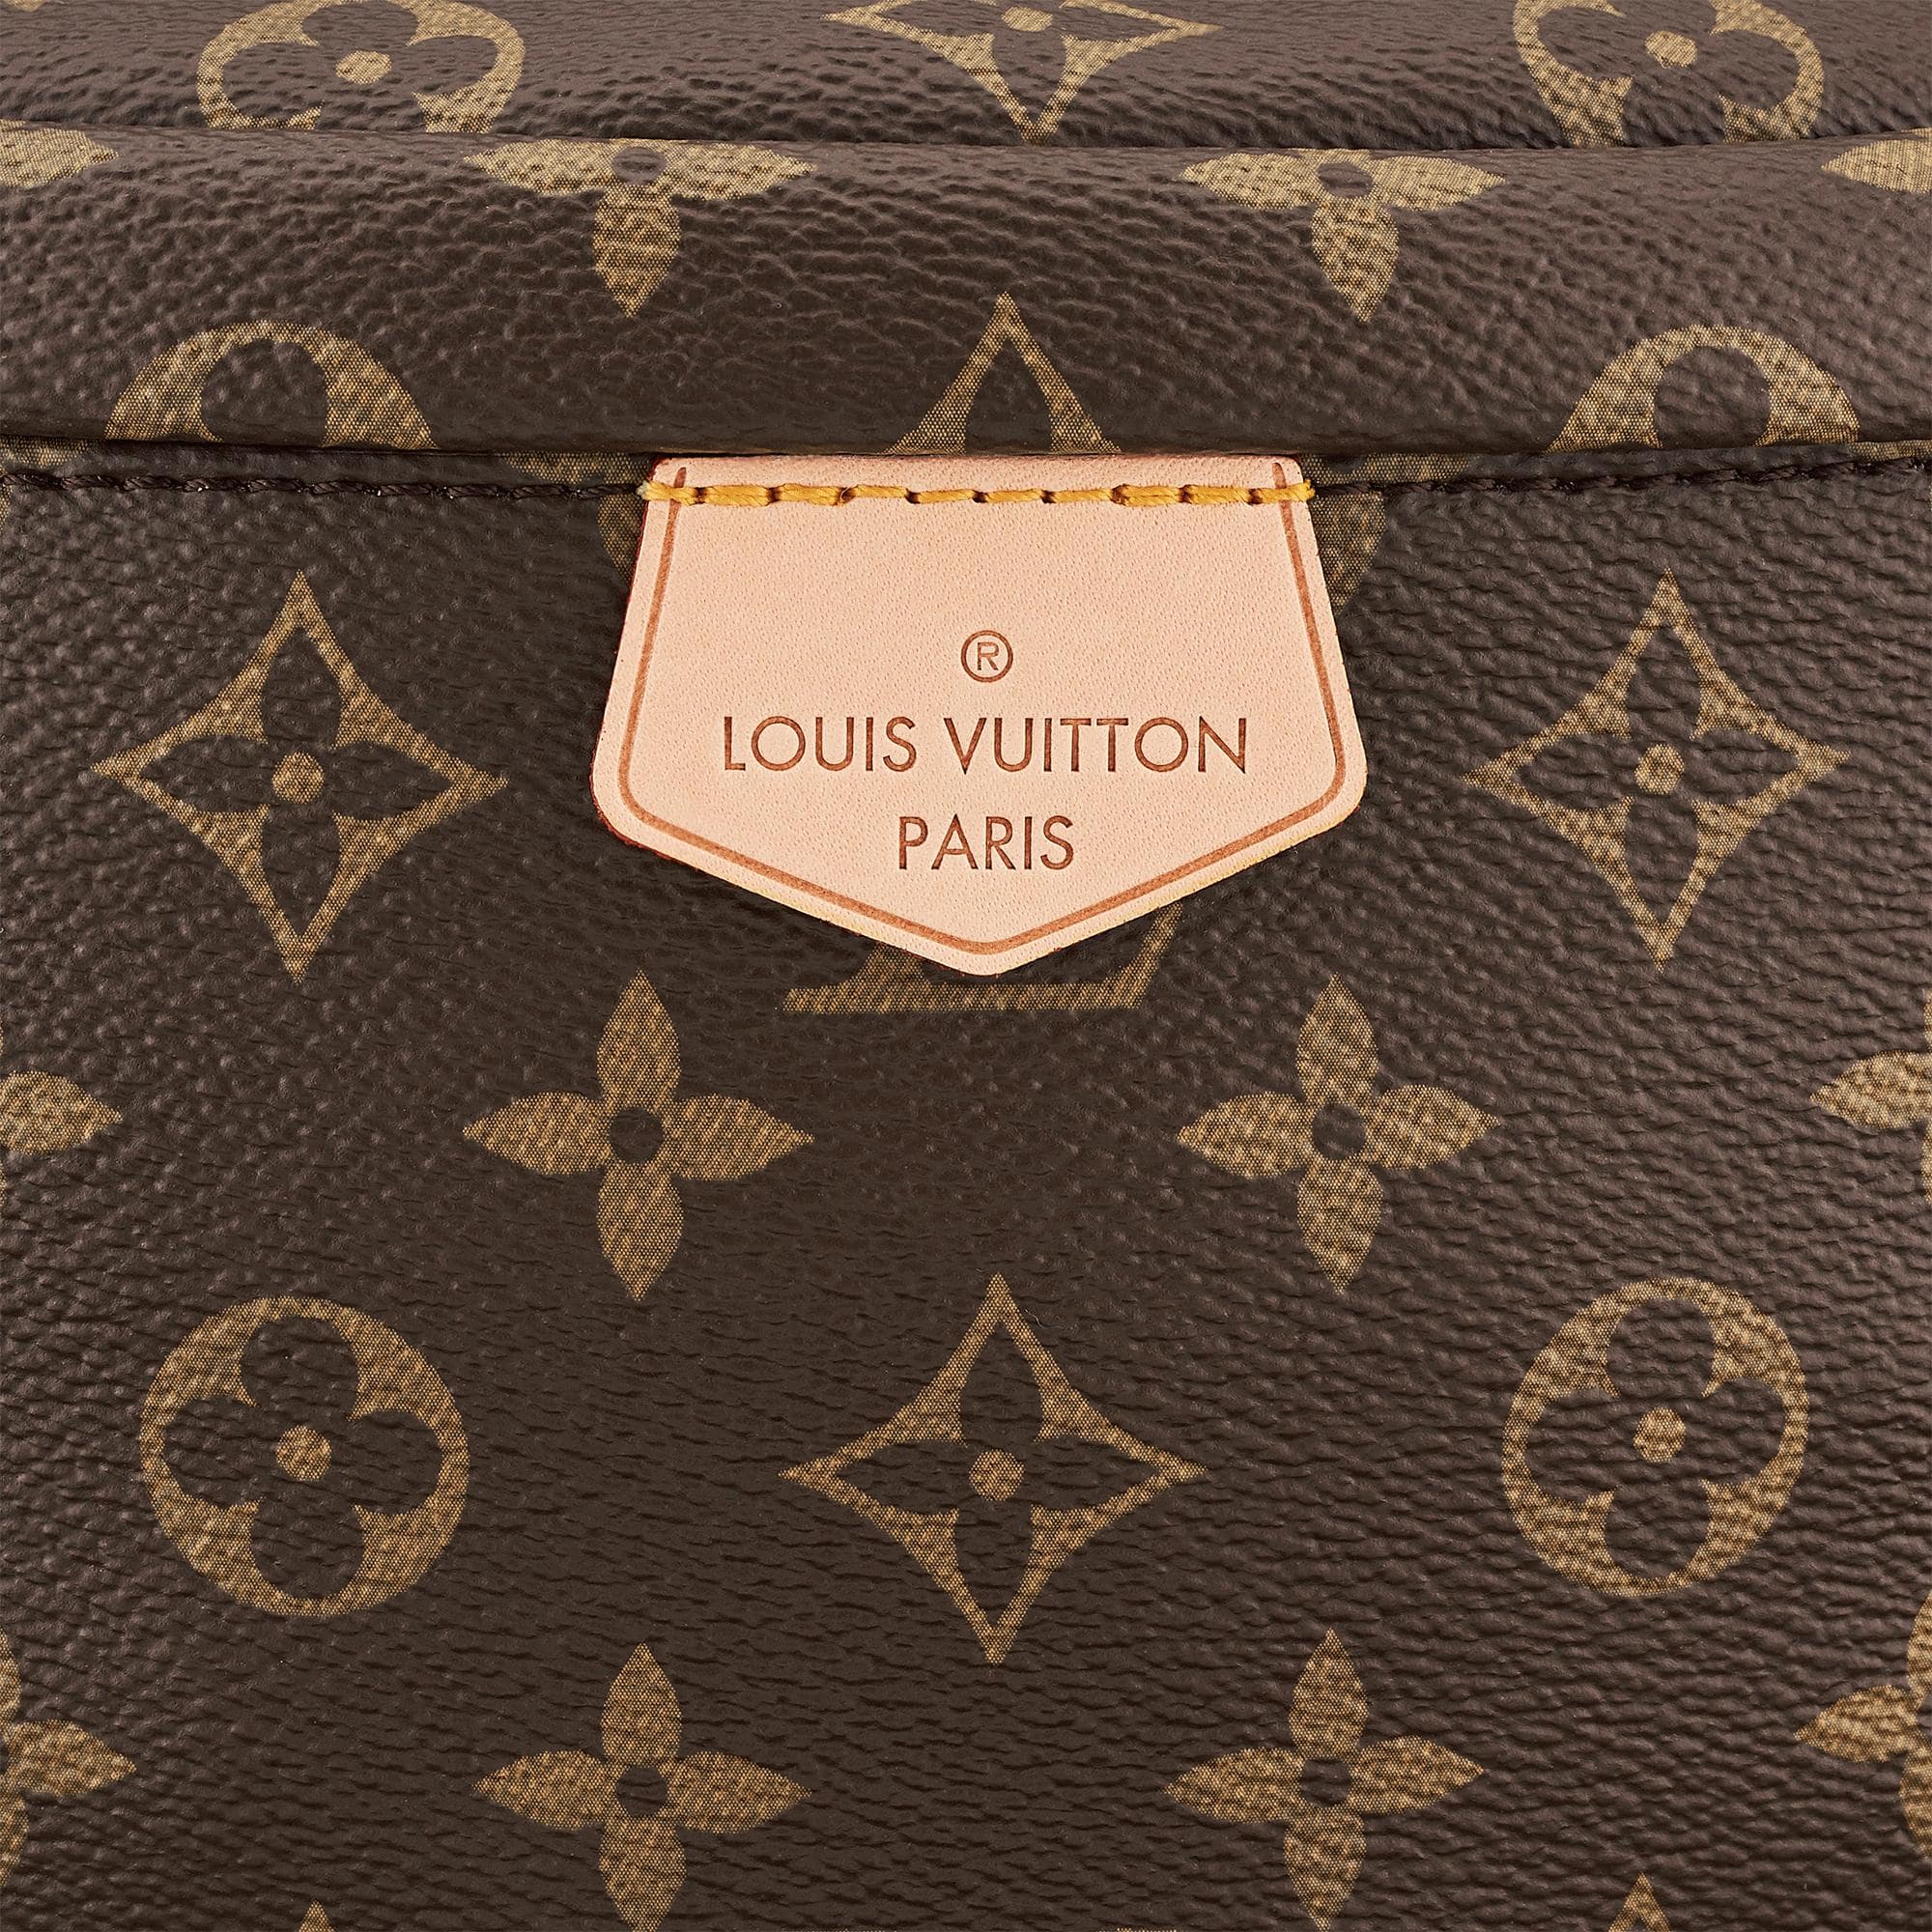 Louis Vuitton: The story behind the brand, by BRAND MINDS